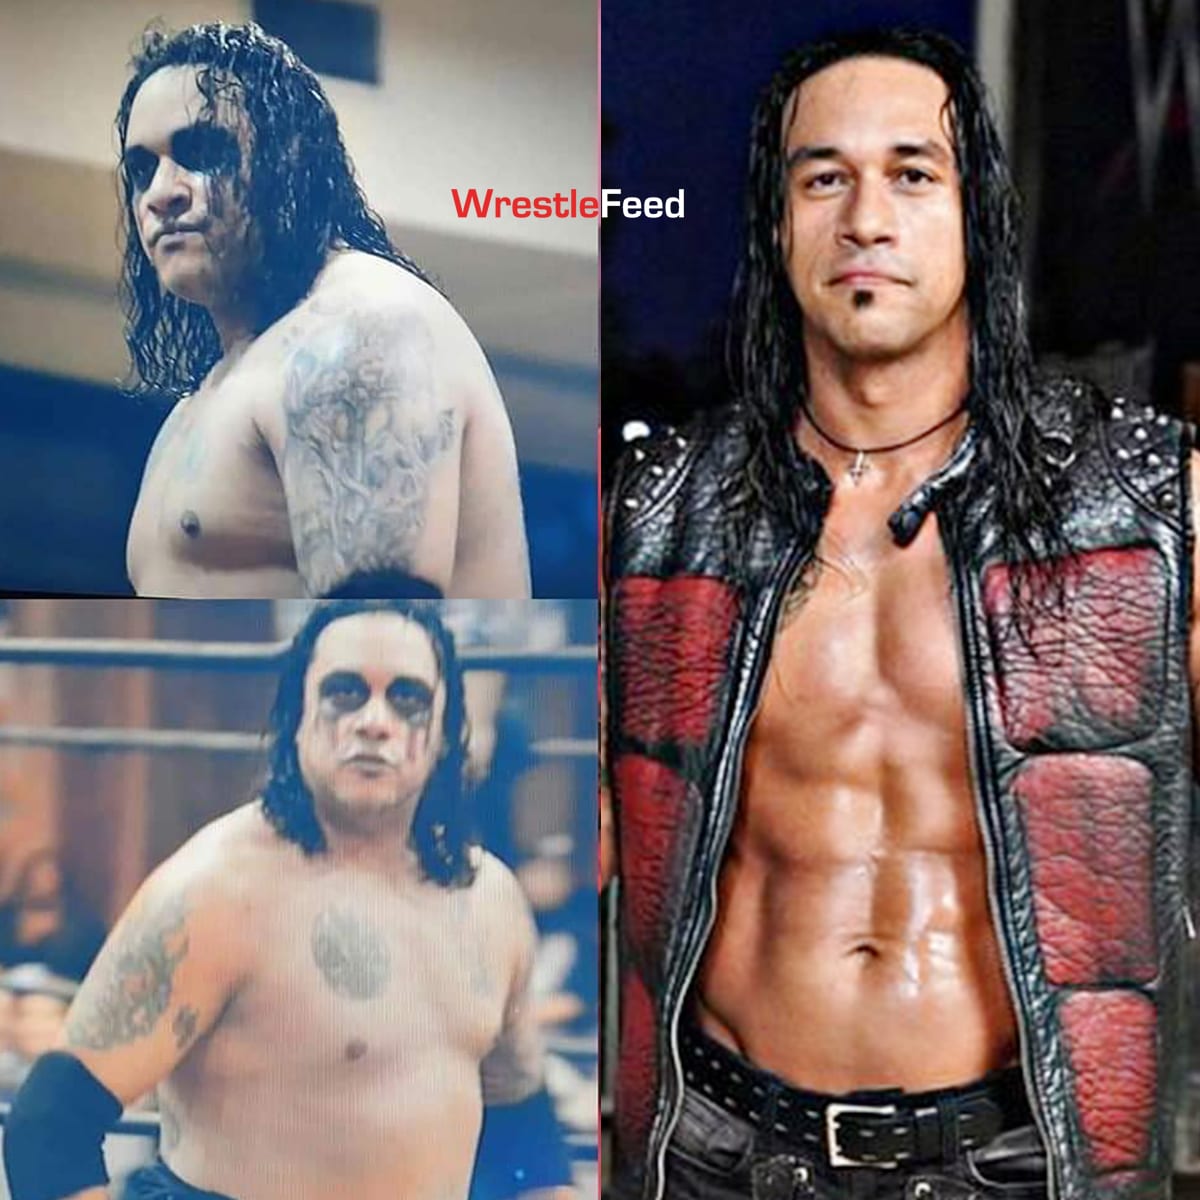 Damian Priest Physical Transformation Then & Now - Dropped Over 100 Lbs Pounds Before Joining WWE WrestleFeed App